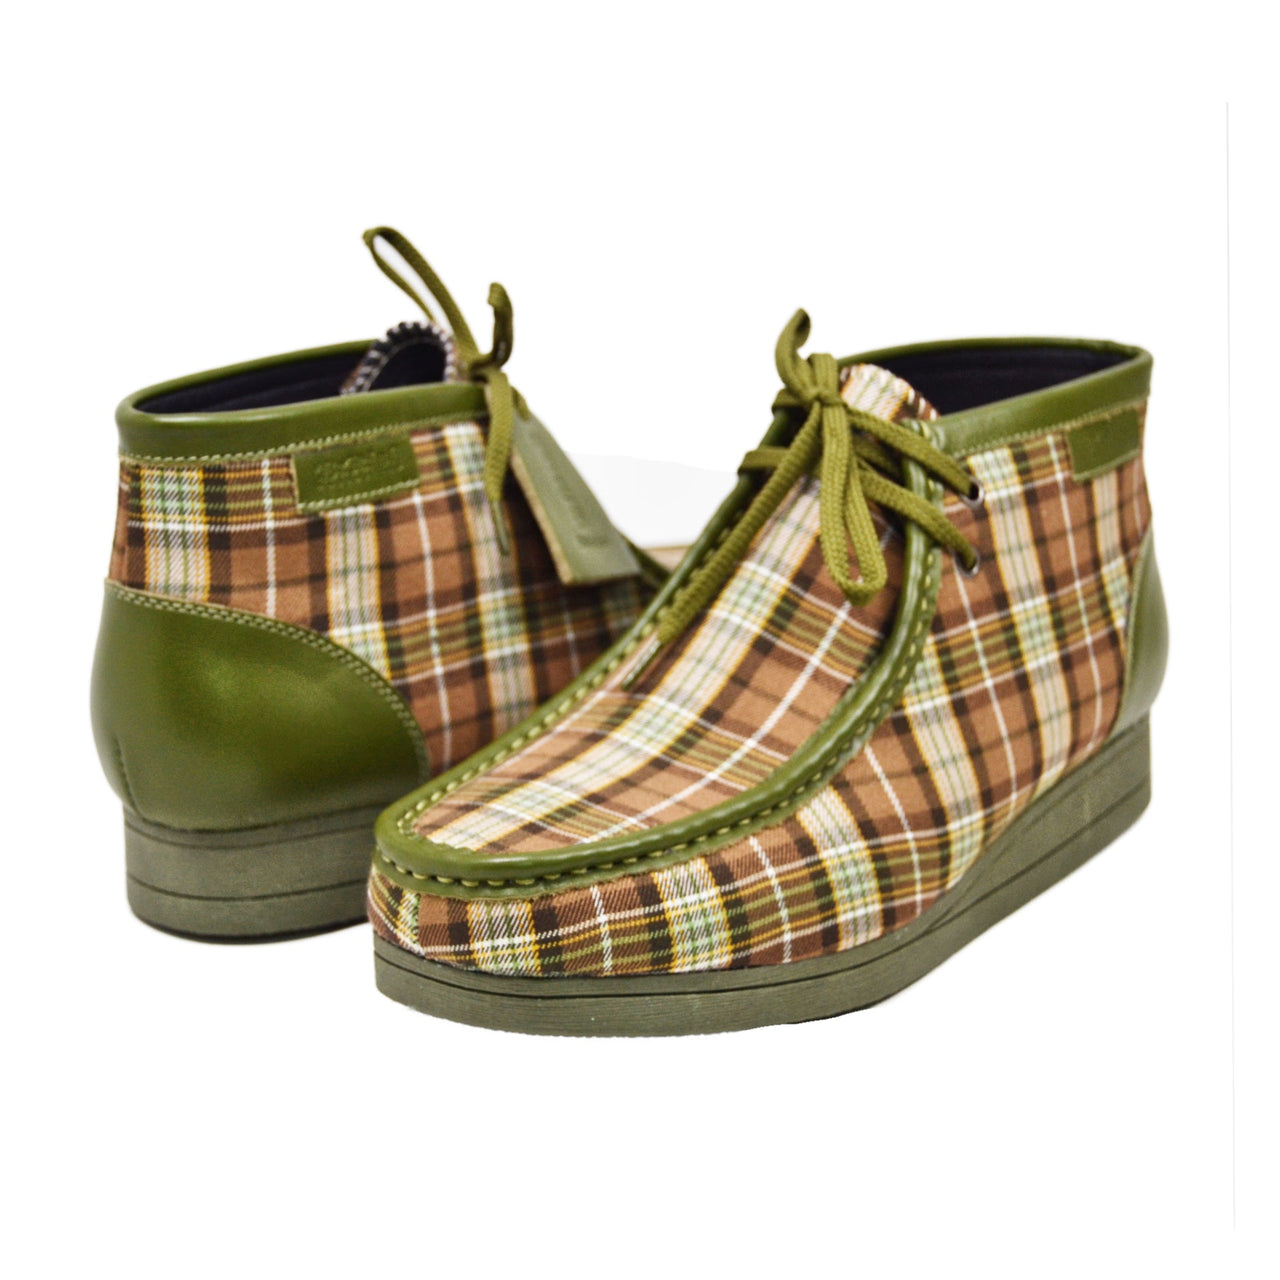 British Walkers New Castle Print 2 Wallabee Boots Men's Plaid Ankle Boot